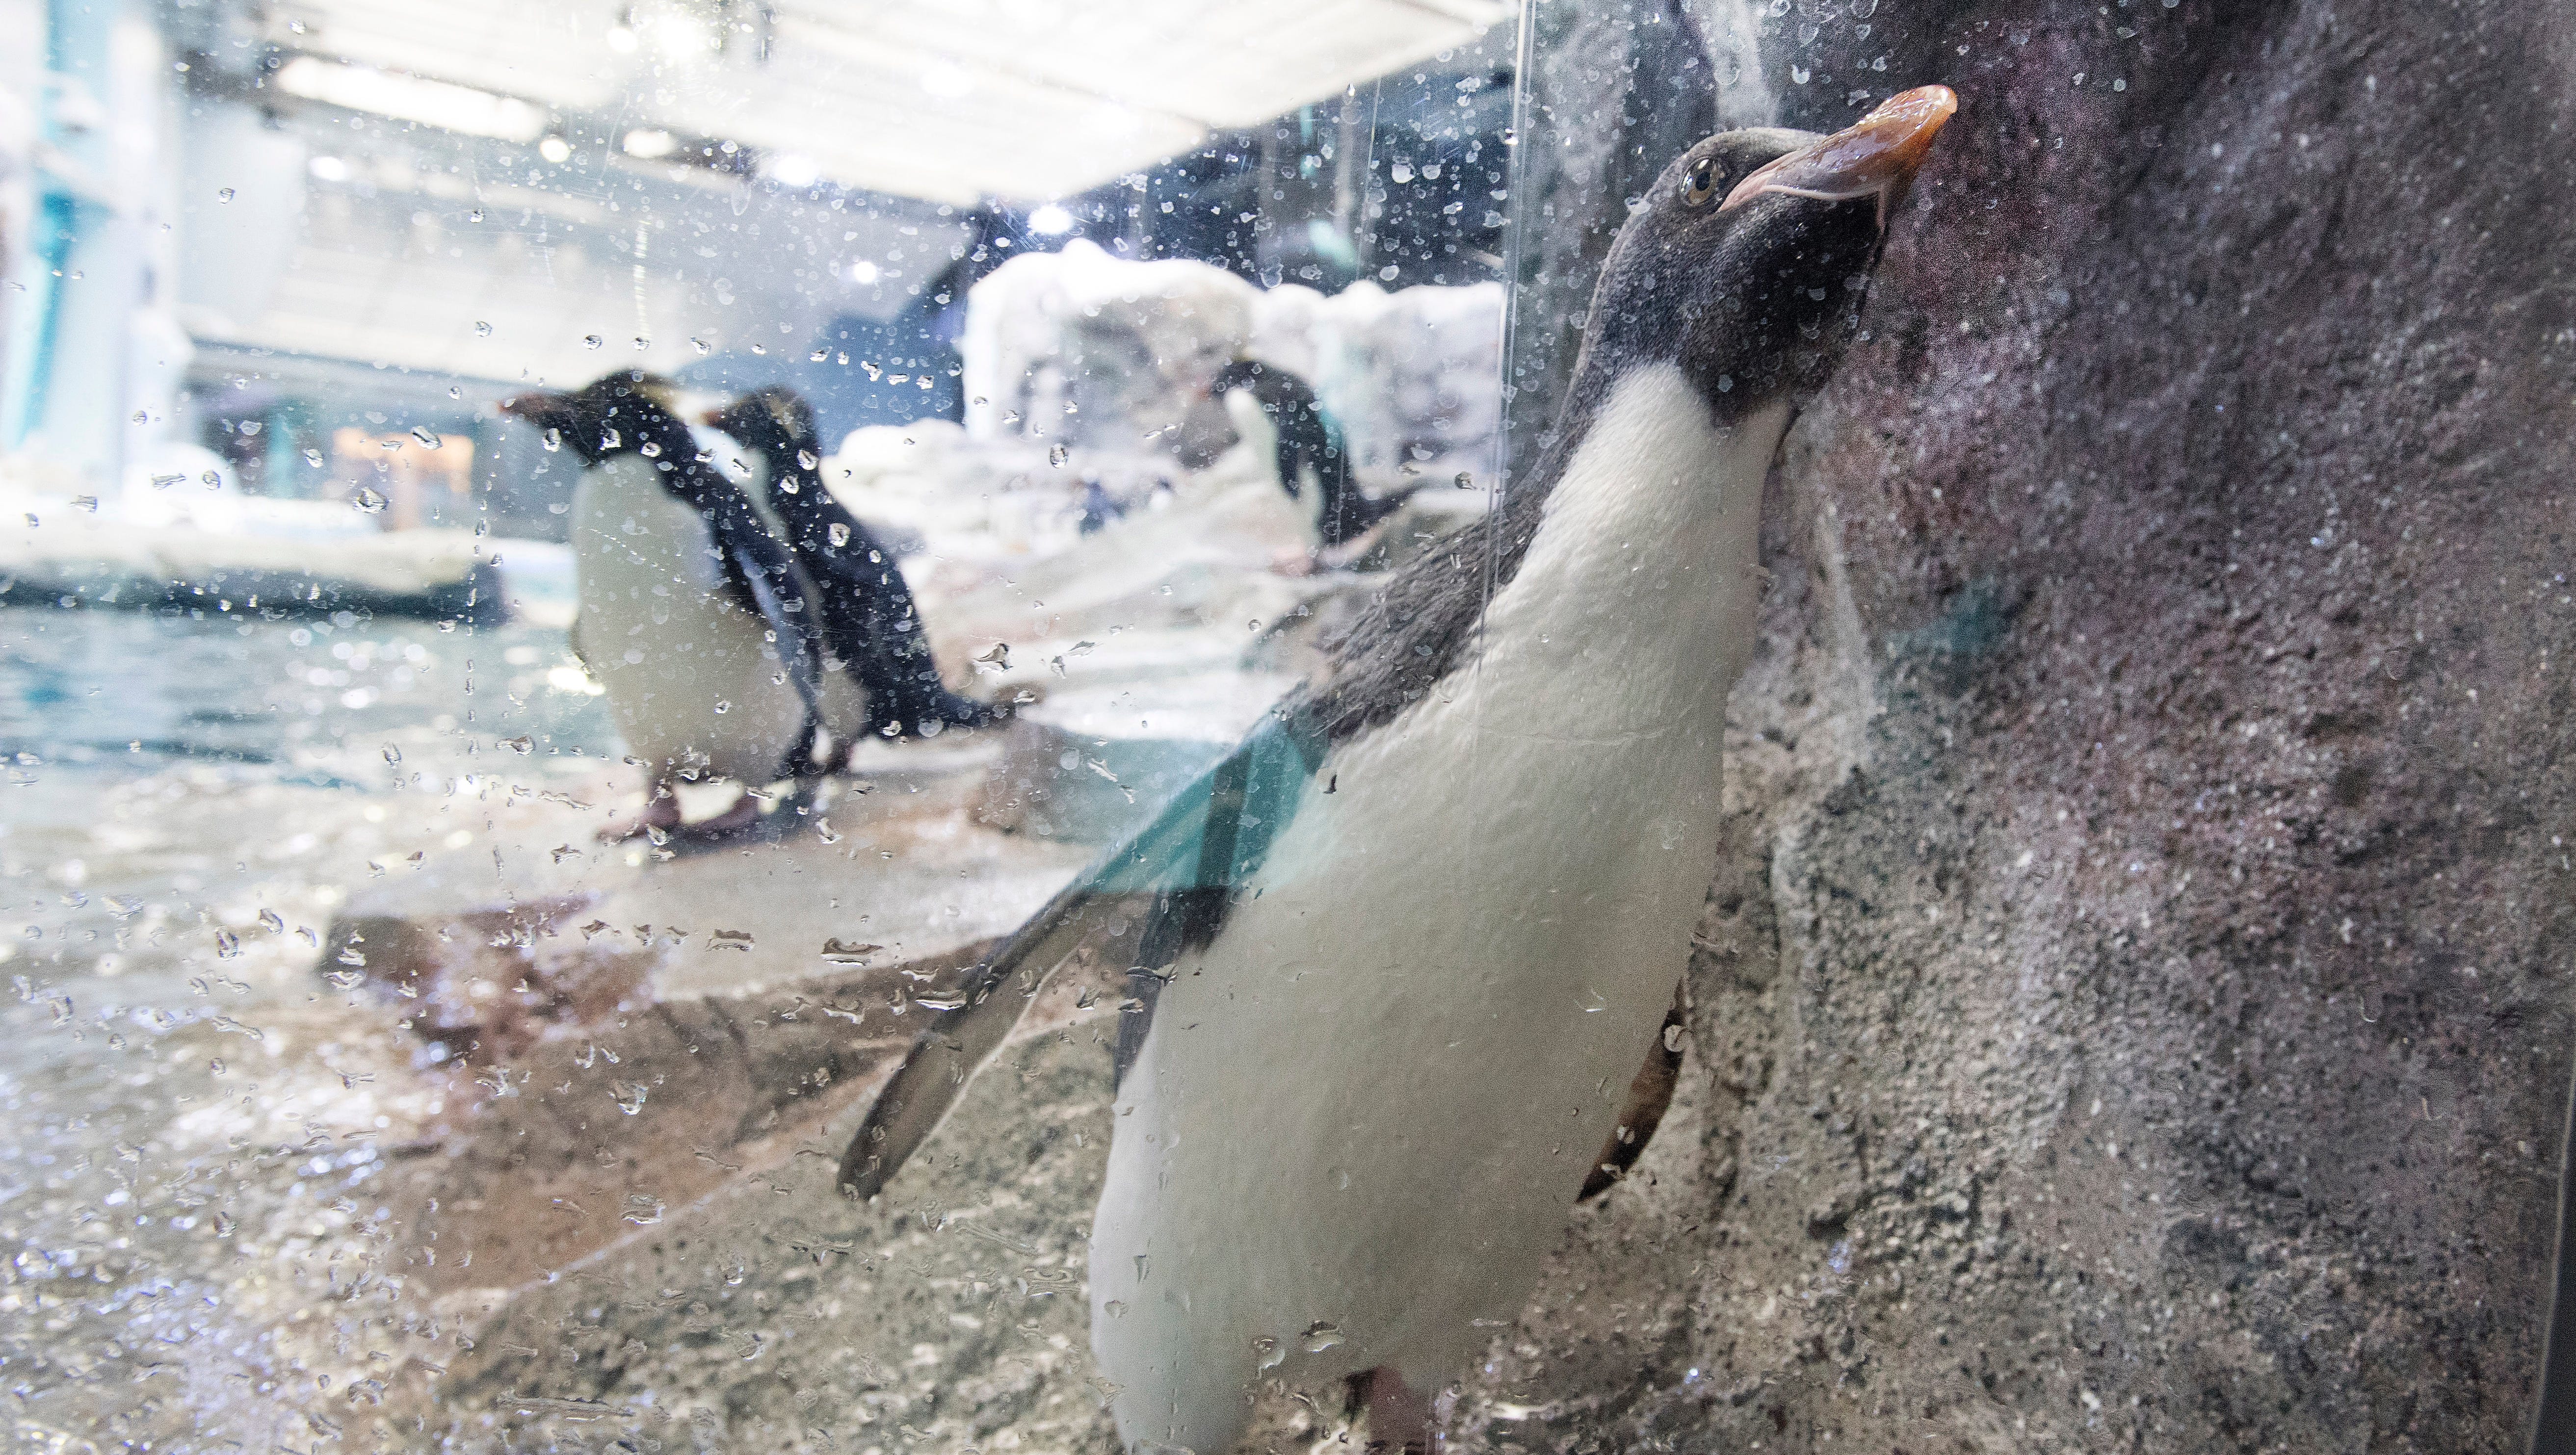 Up close and personal is the name of the game at the Polk Penguin Conservation Center.